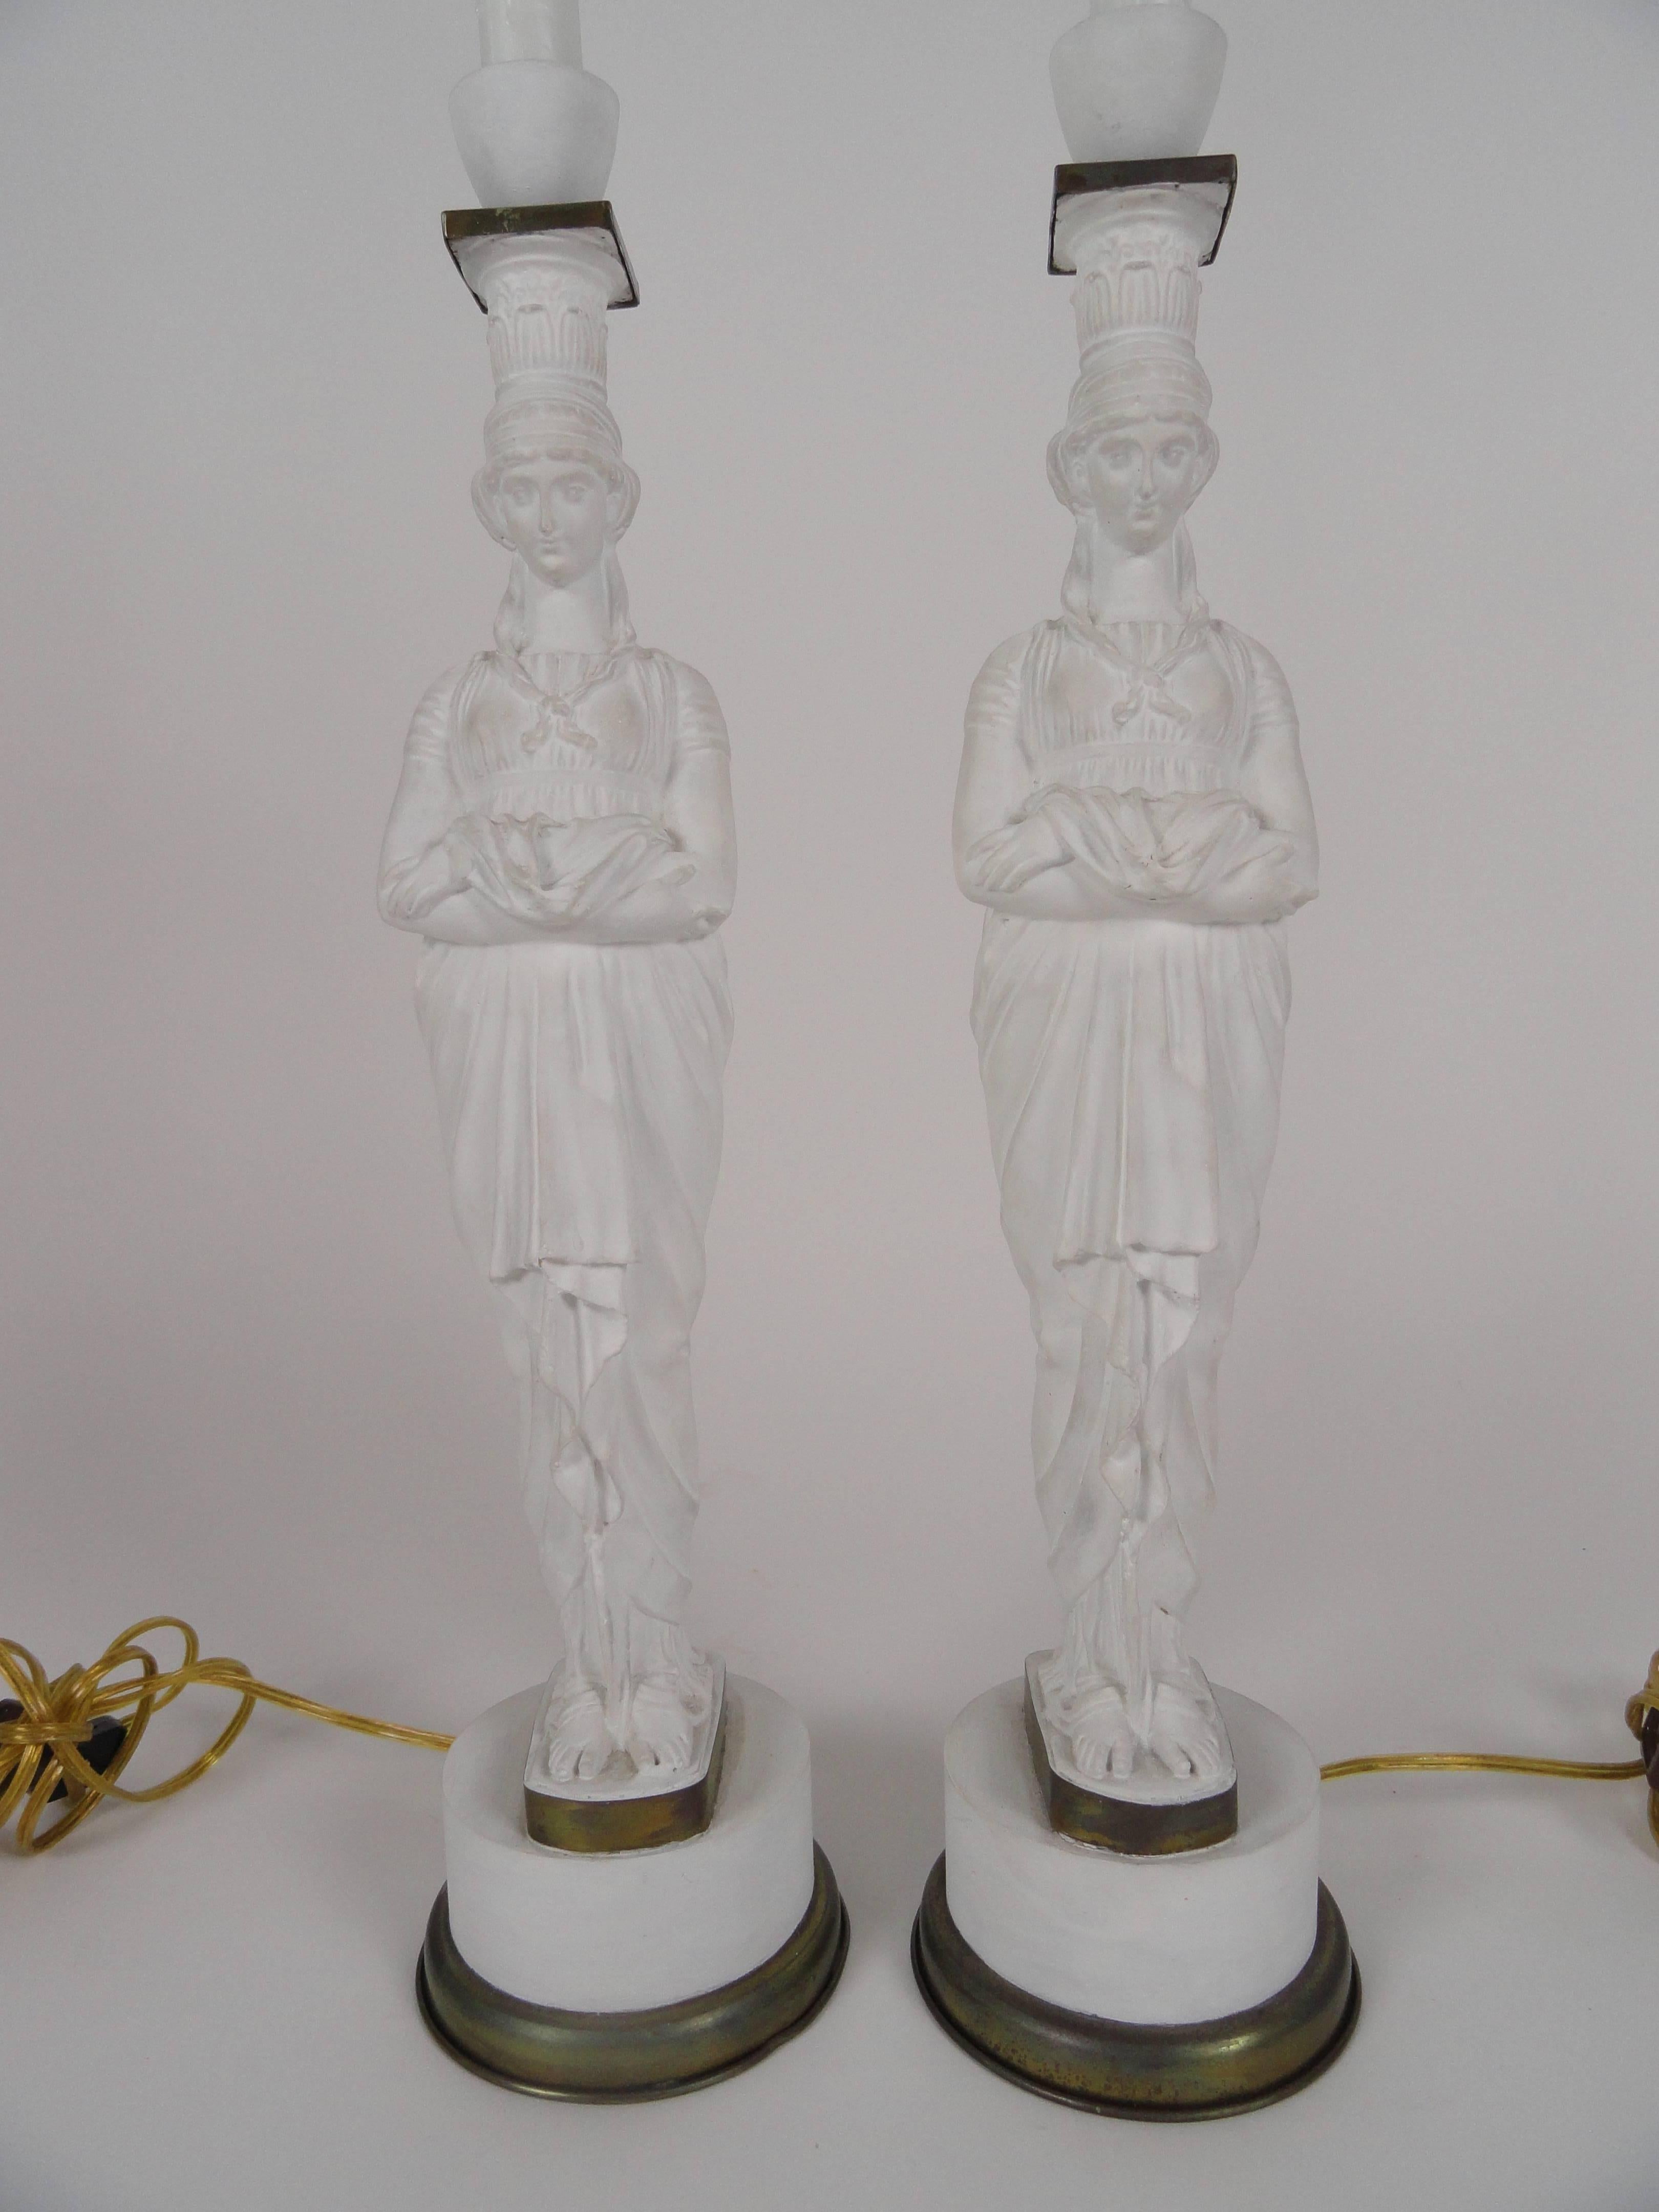 Pair of French metal lamps modeled after the figure supports at the Temple of Diana at the Acropolis site in Athens.
Finely carved with fine features and beautiful draping on the figures. These are metal and fairly heavy lamps.
Rewired with inline